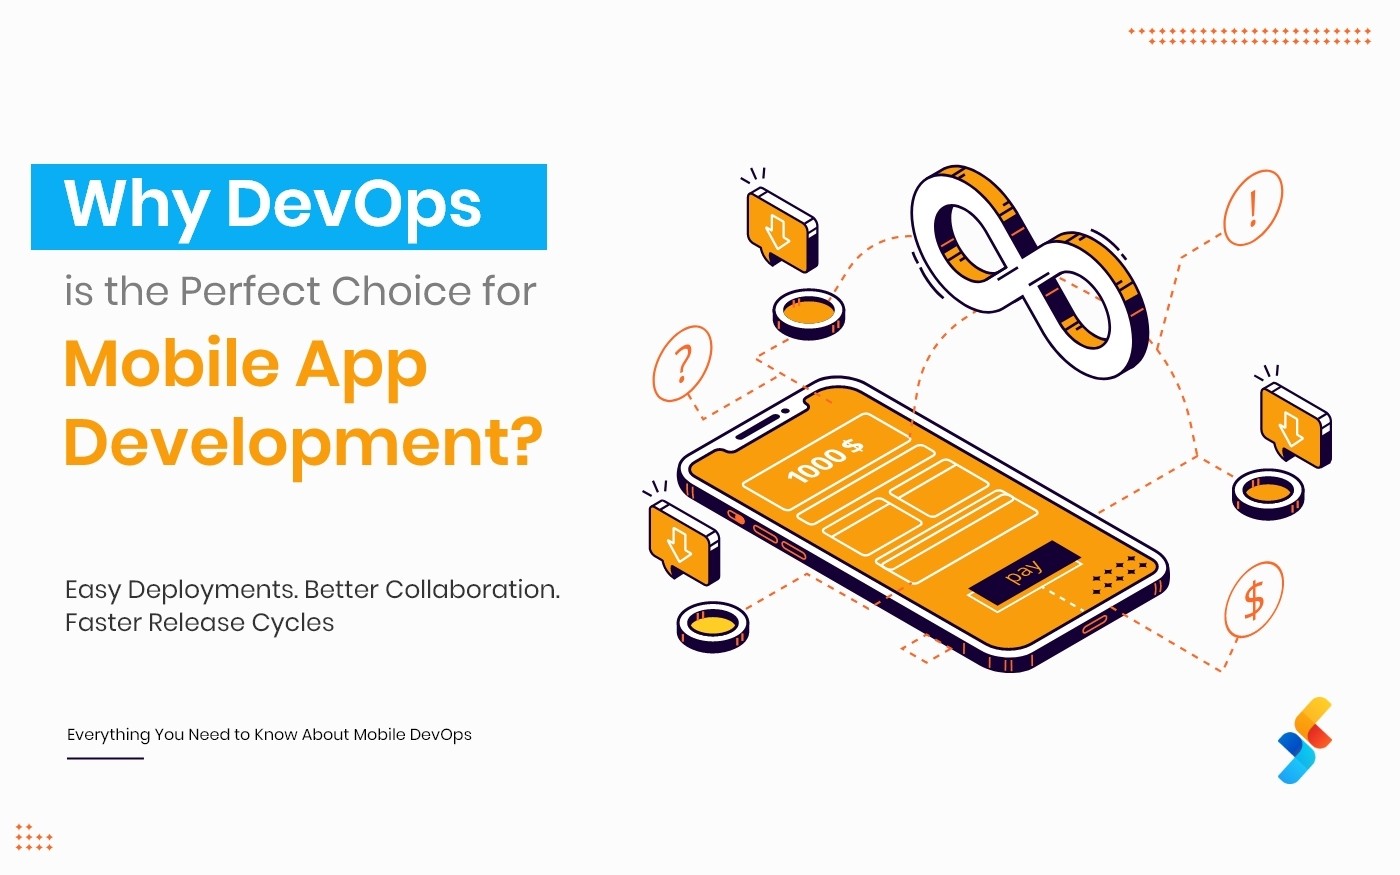 Why DevOps is the Perfect Choice for Mobile App Development?